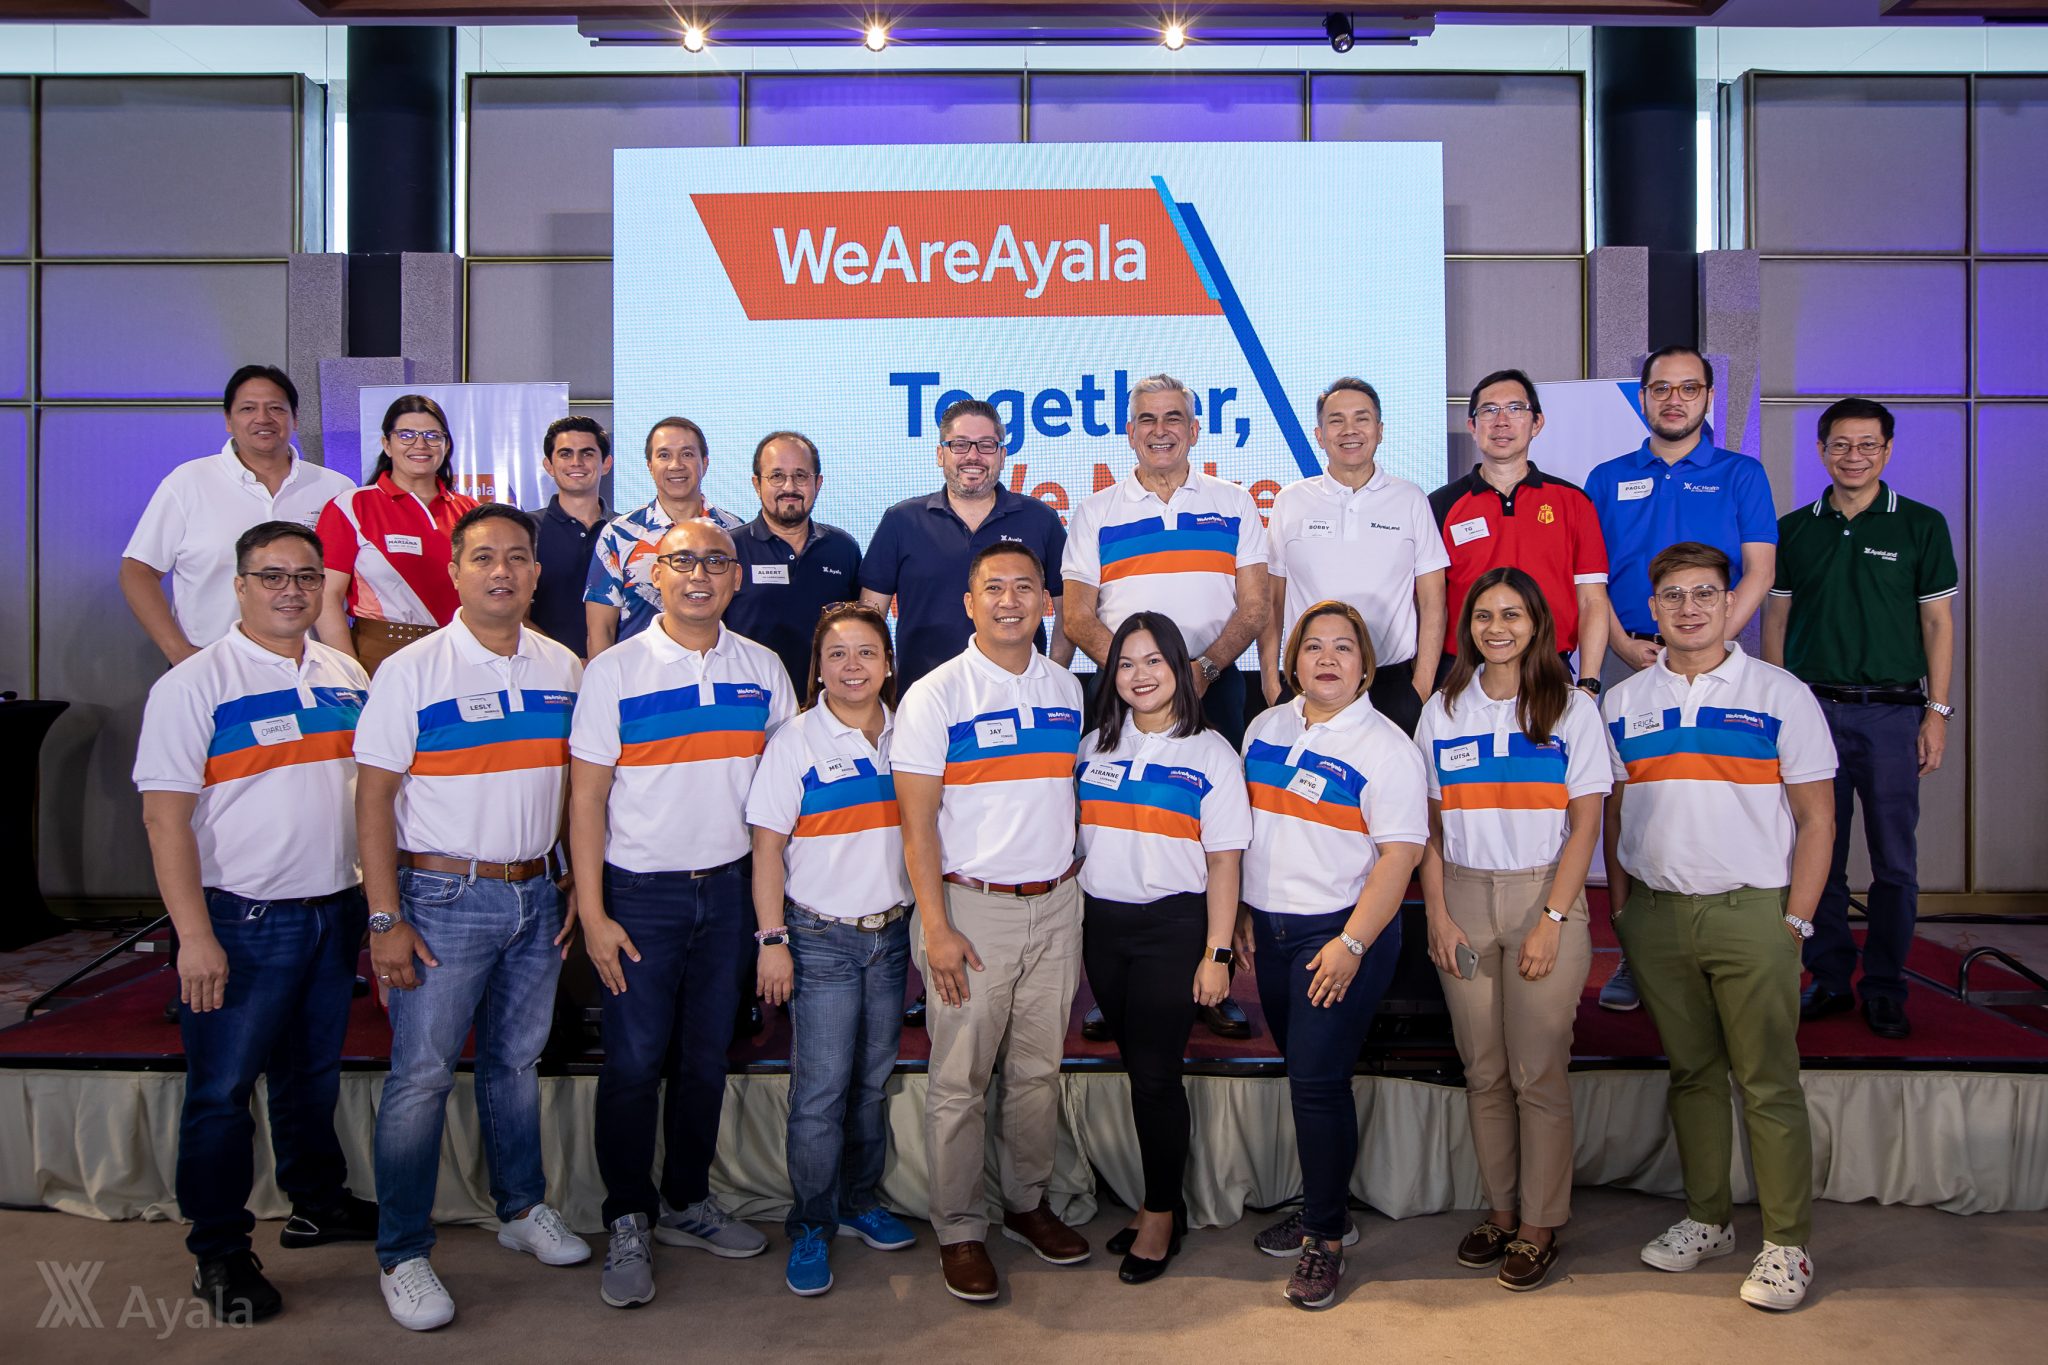 Ayala demonstrates growing presence in Central Luzon with relaunch of WeAreAyala Business Club